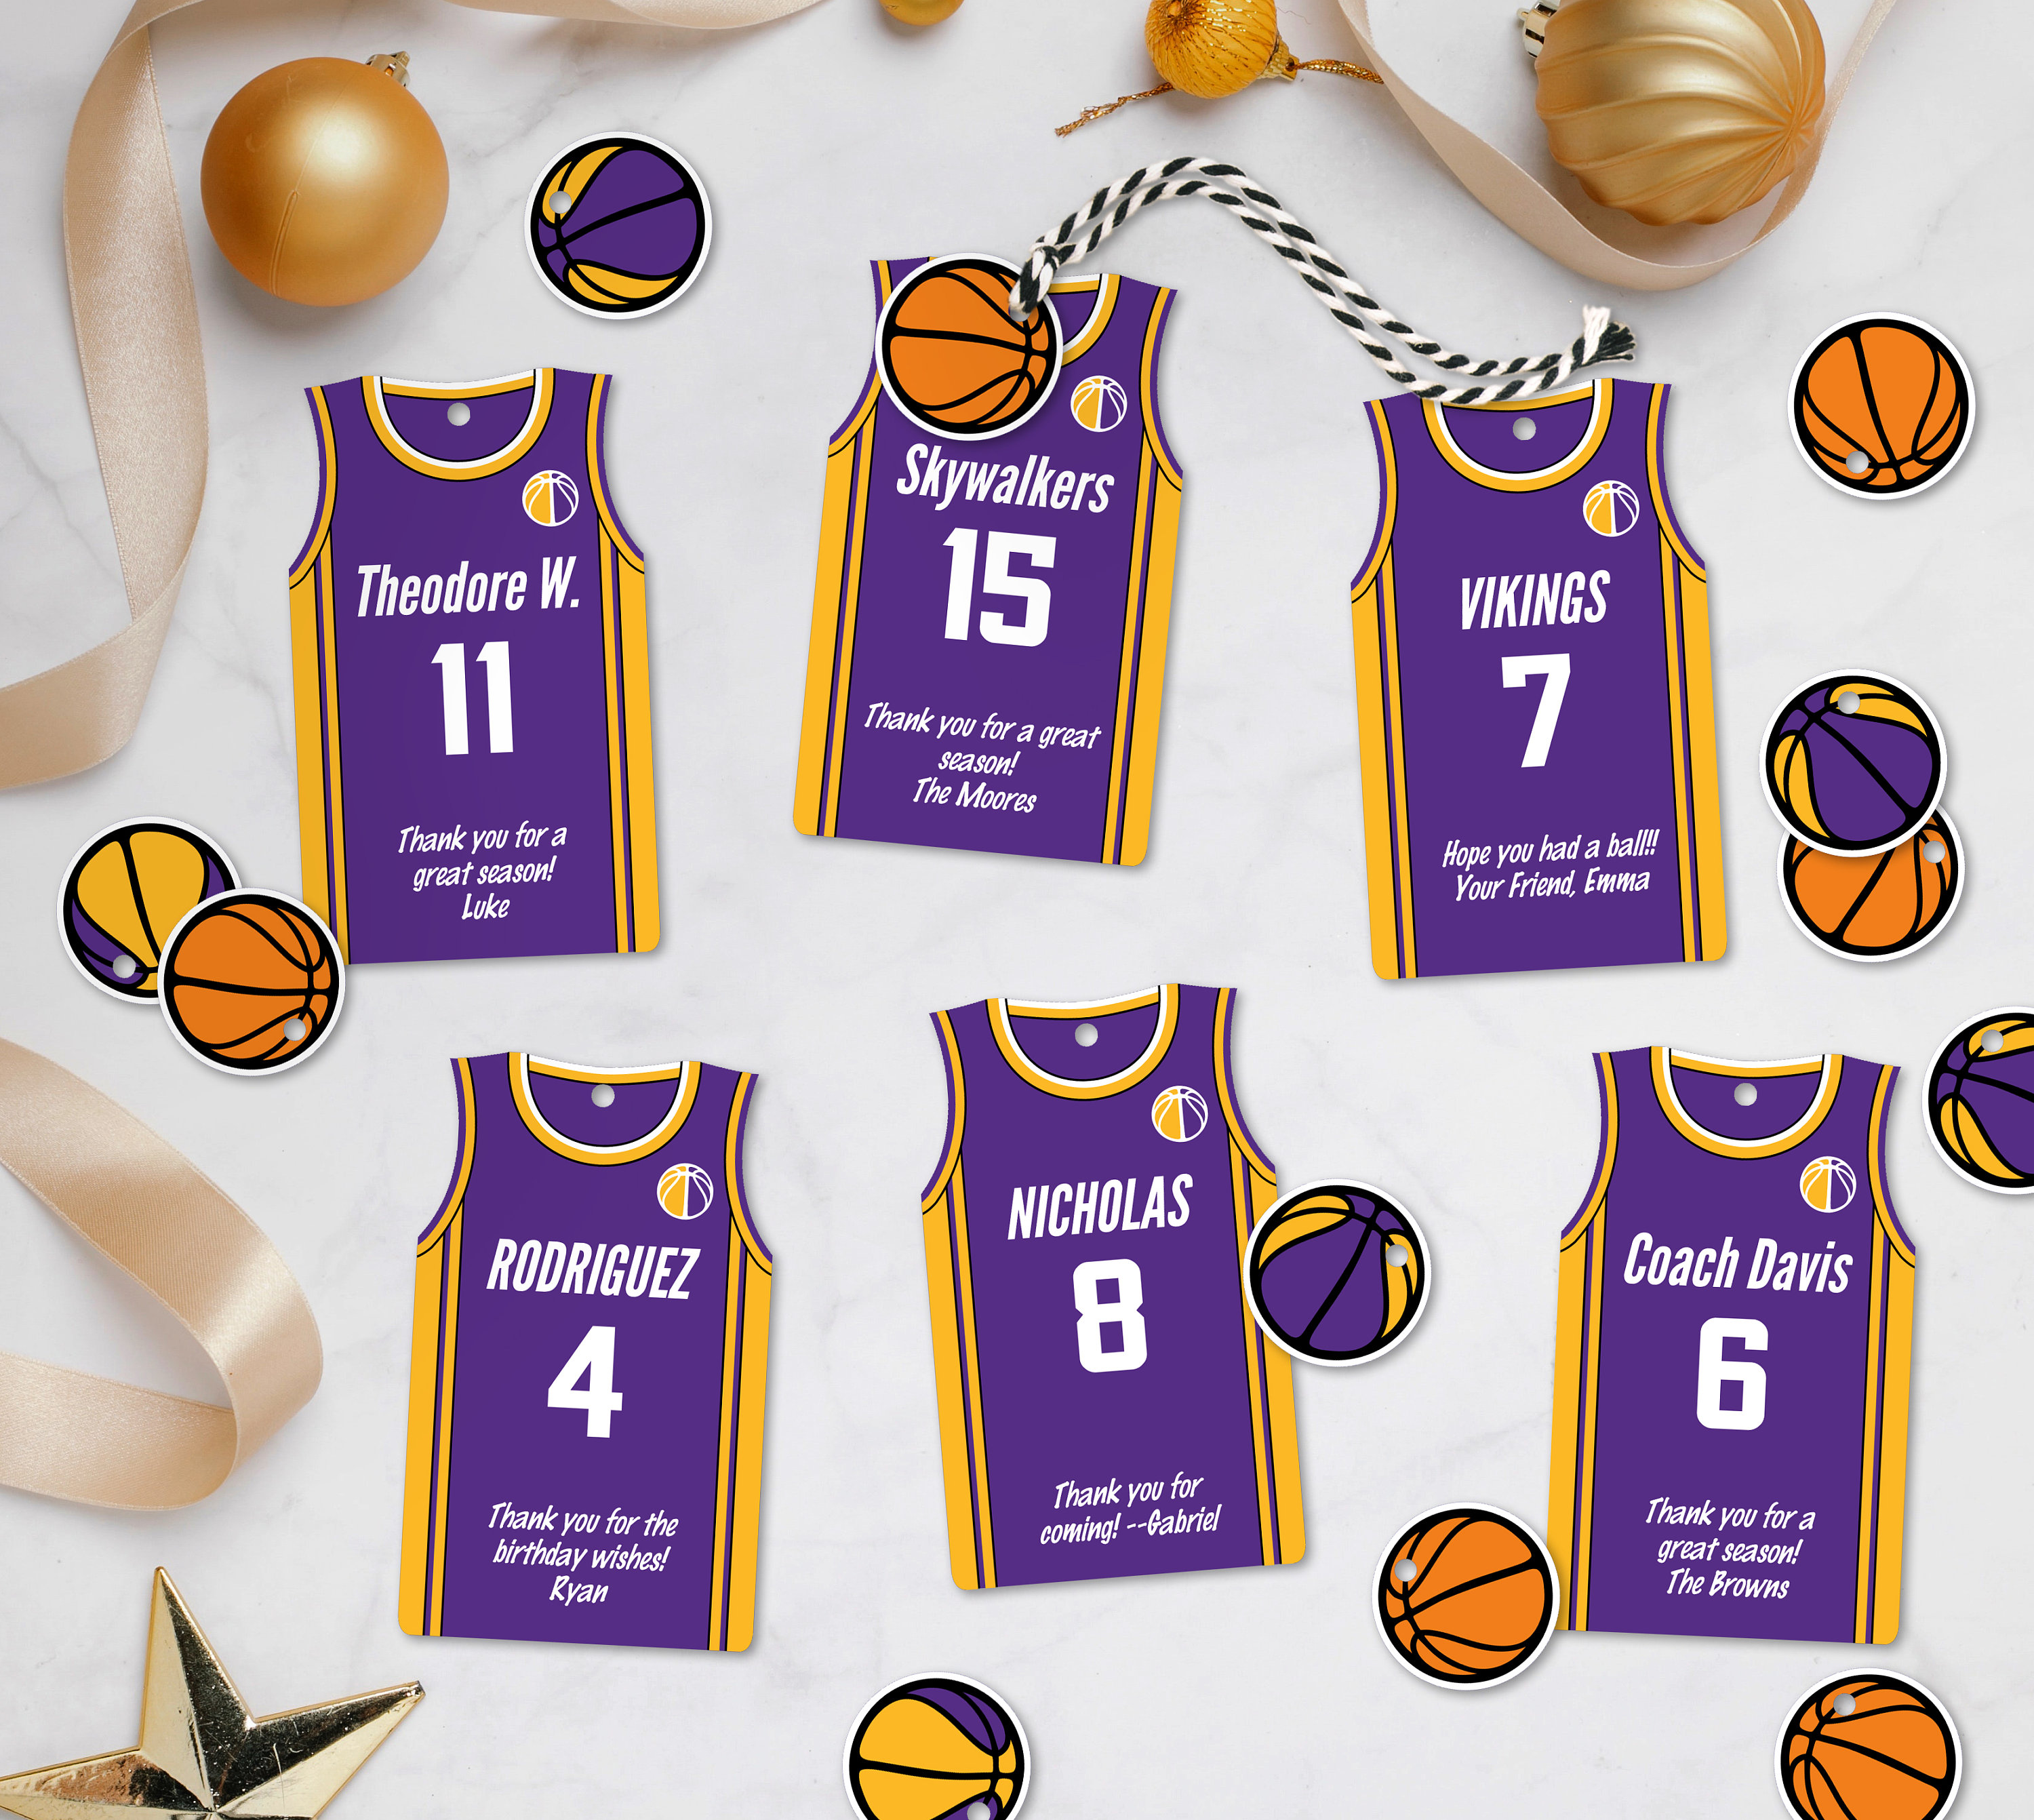 printable lakers jersey template